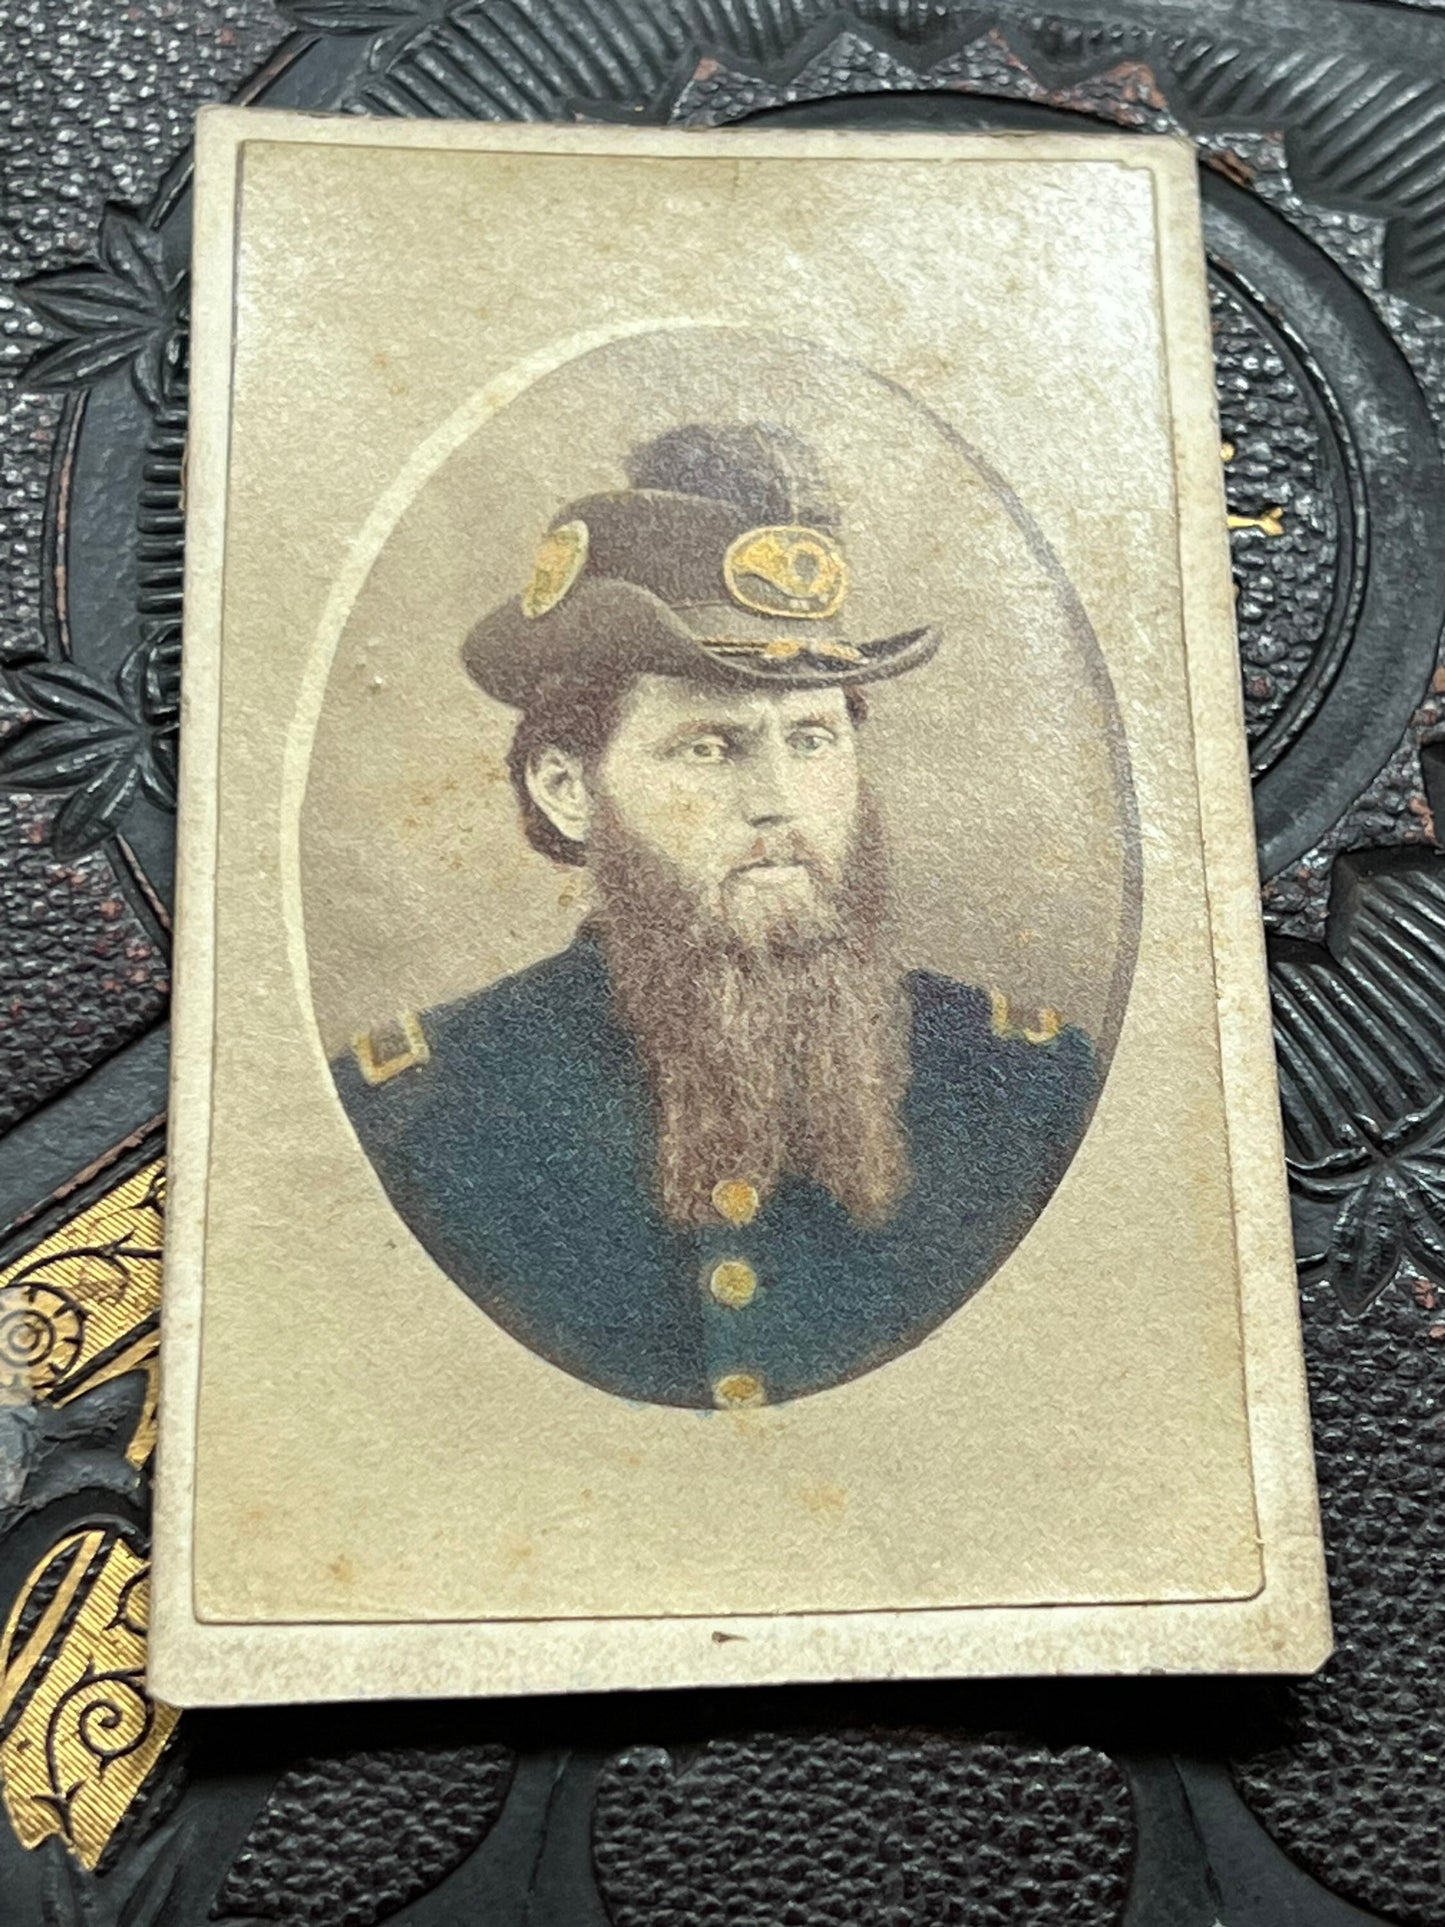 Antique cdv photo civil war soldier 207th Pennsylvania infantry 1864 idd excellent hand tinting